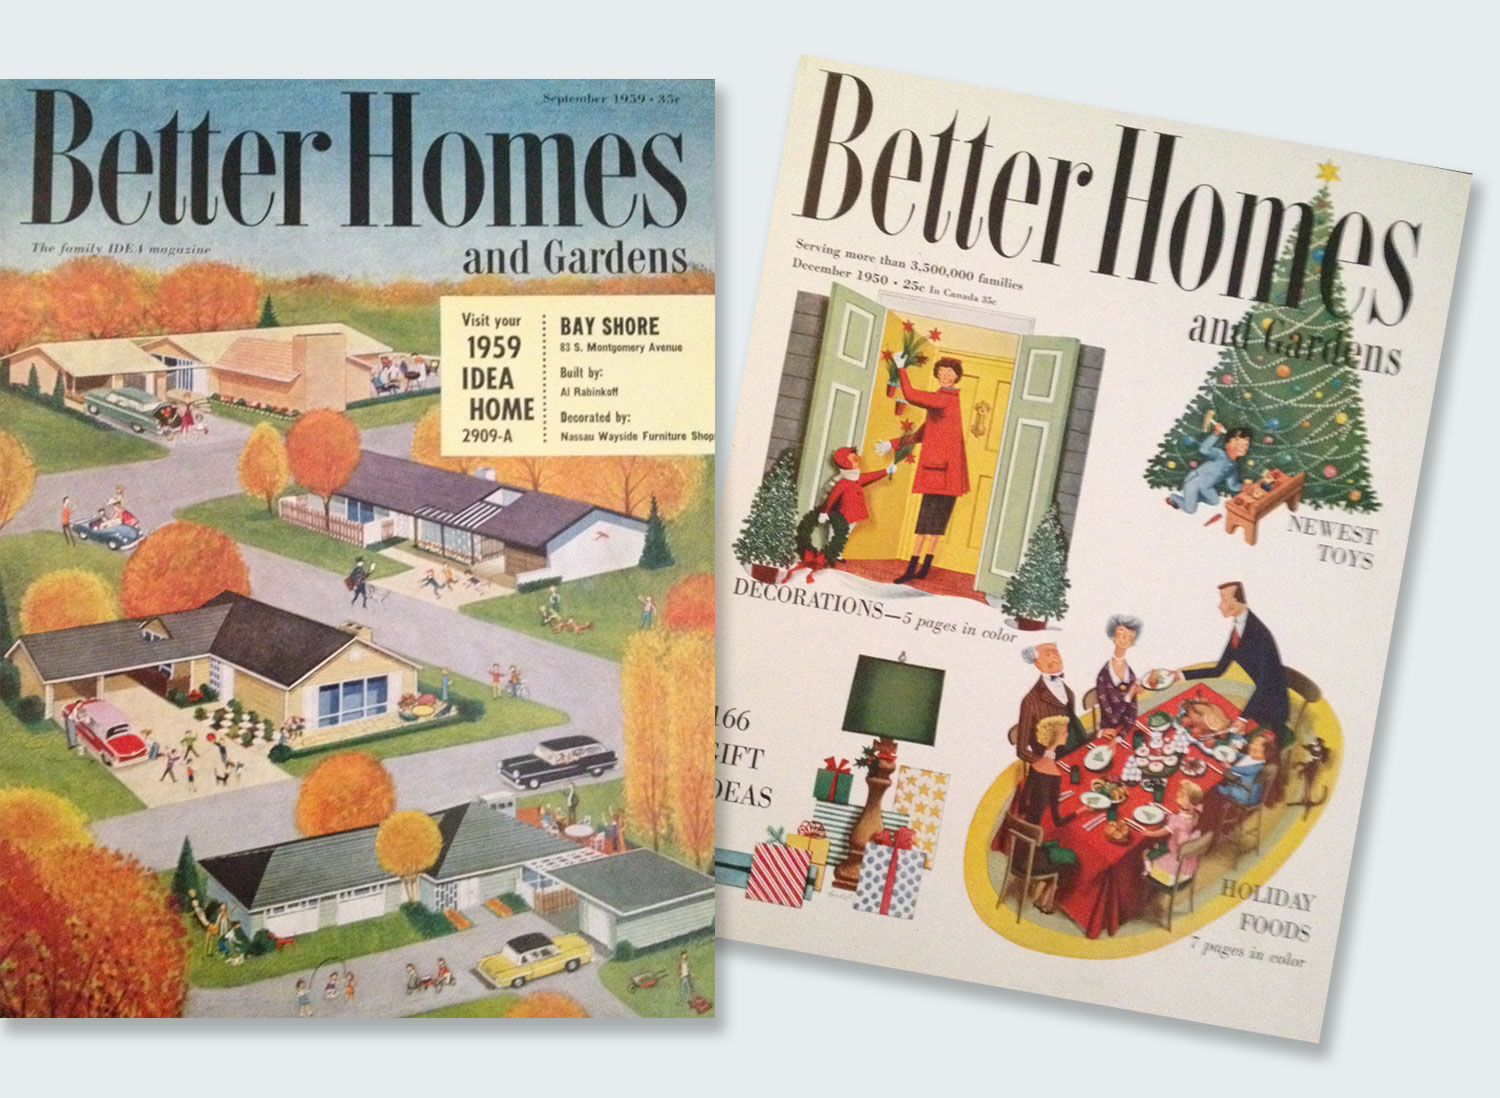 Better Homes and Gardens, 1959 and 1950